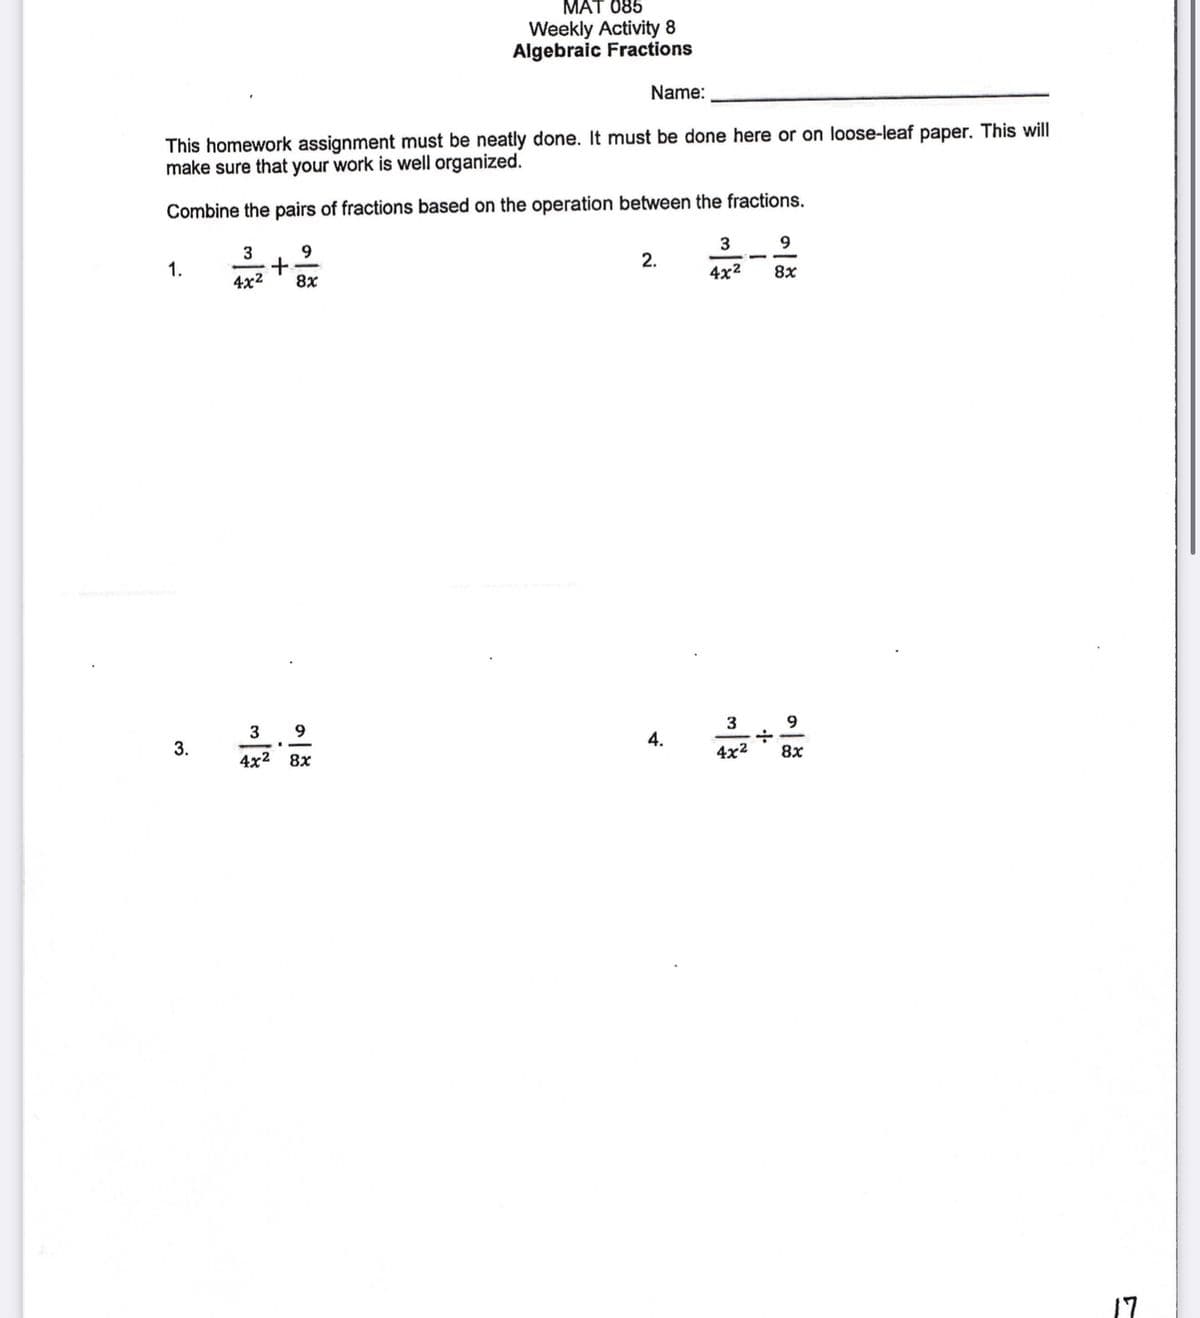 MAT 085
Weekly Activity 8
Algebraic Fractions
Name:
This homework assignment must be neatly done. It must be done here or on loose-leaf paper. This will
make sure that your work is well organized.
Combine the pairs of fractions based on the operation between the fractions.
3
9
3
9
2.
1.
4x2
8x
4x2
8x
3
9.
3
9.
4.
3.
4x2
8x
4x2 8х
17
